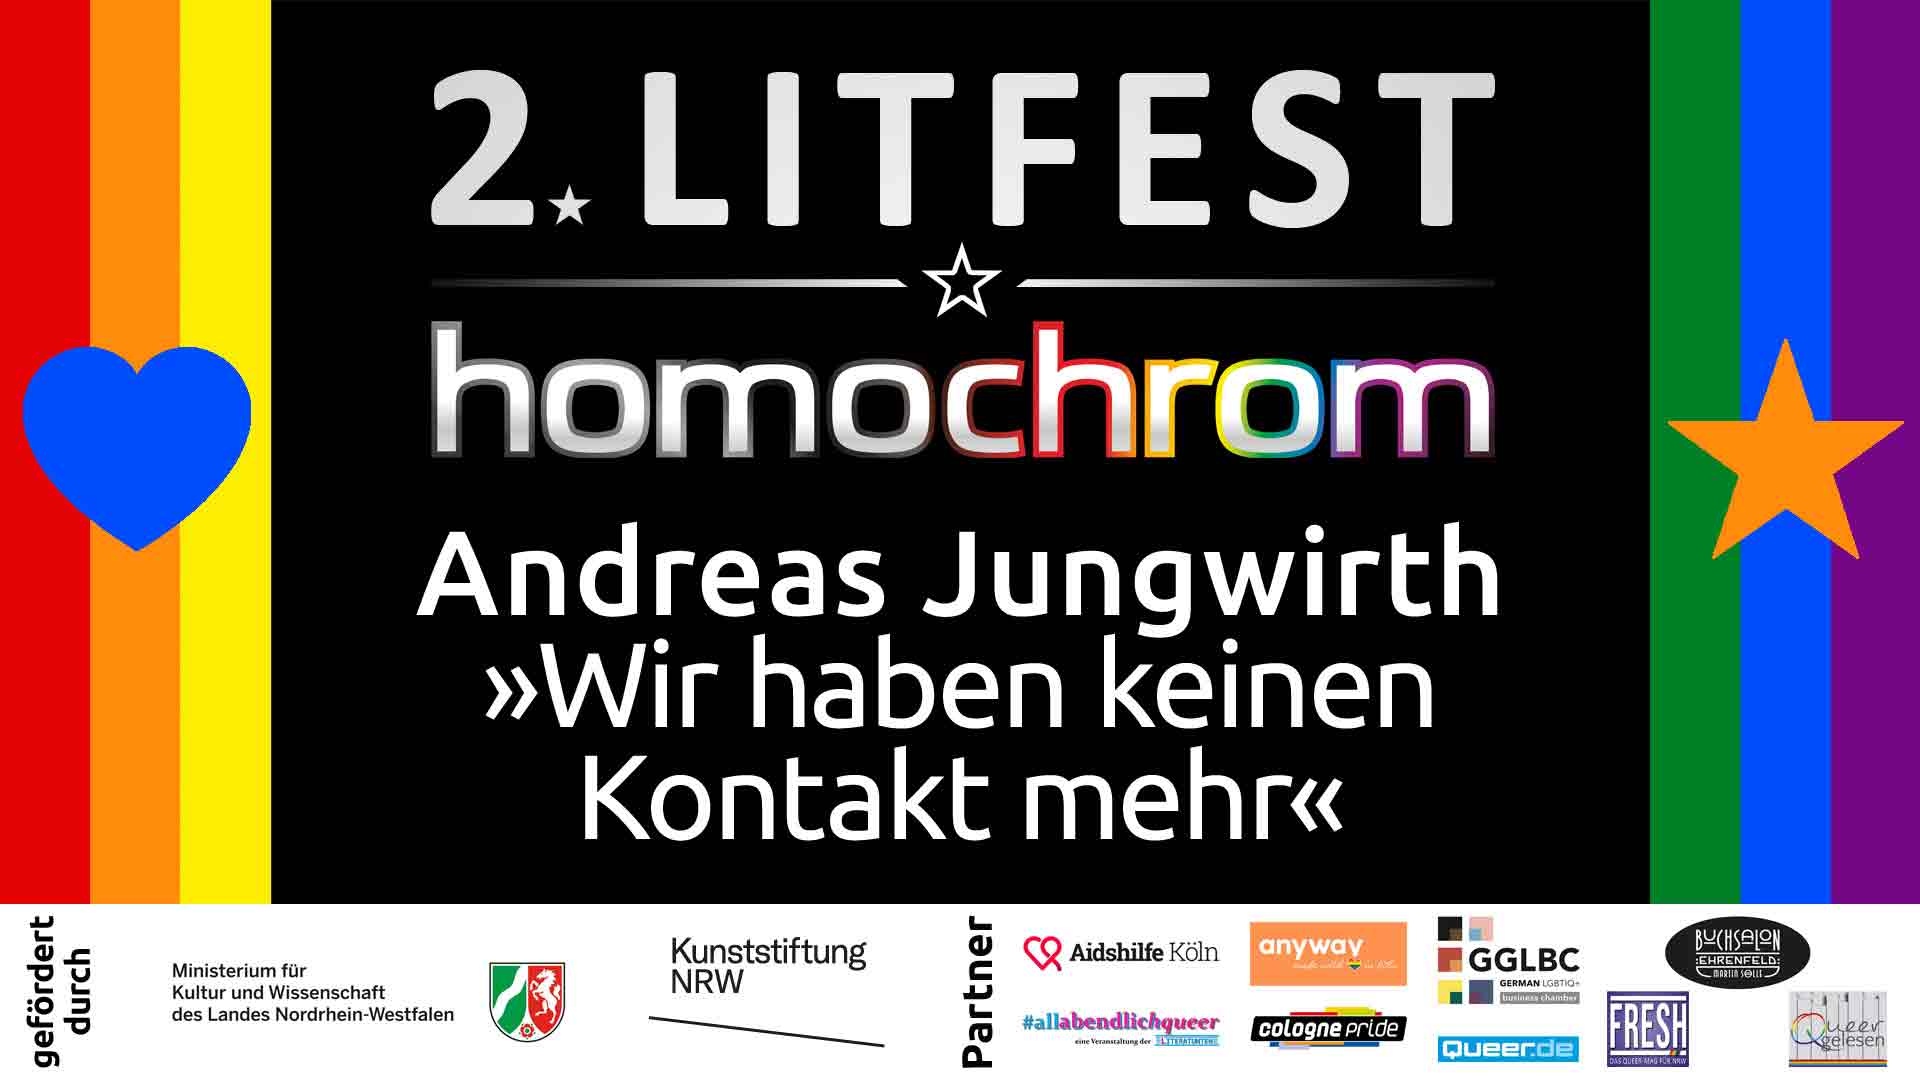 Youtube Video, Andreas Jungwirth, 2. Litfest homochrom